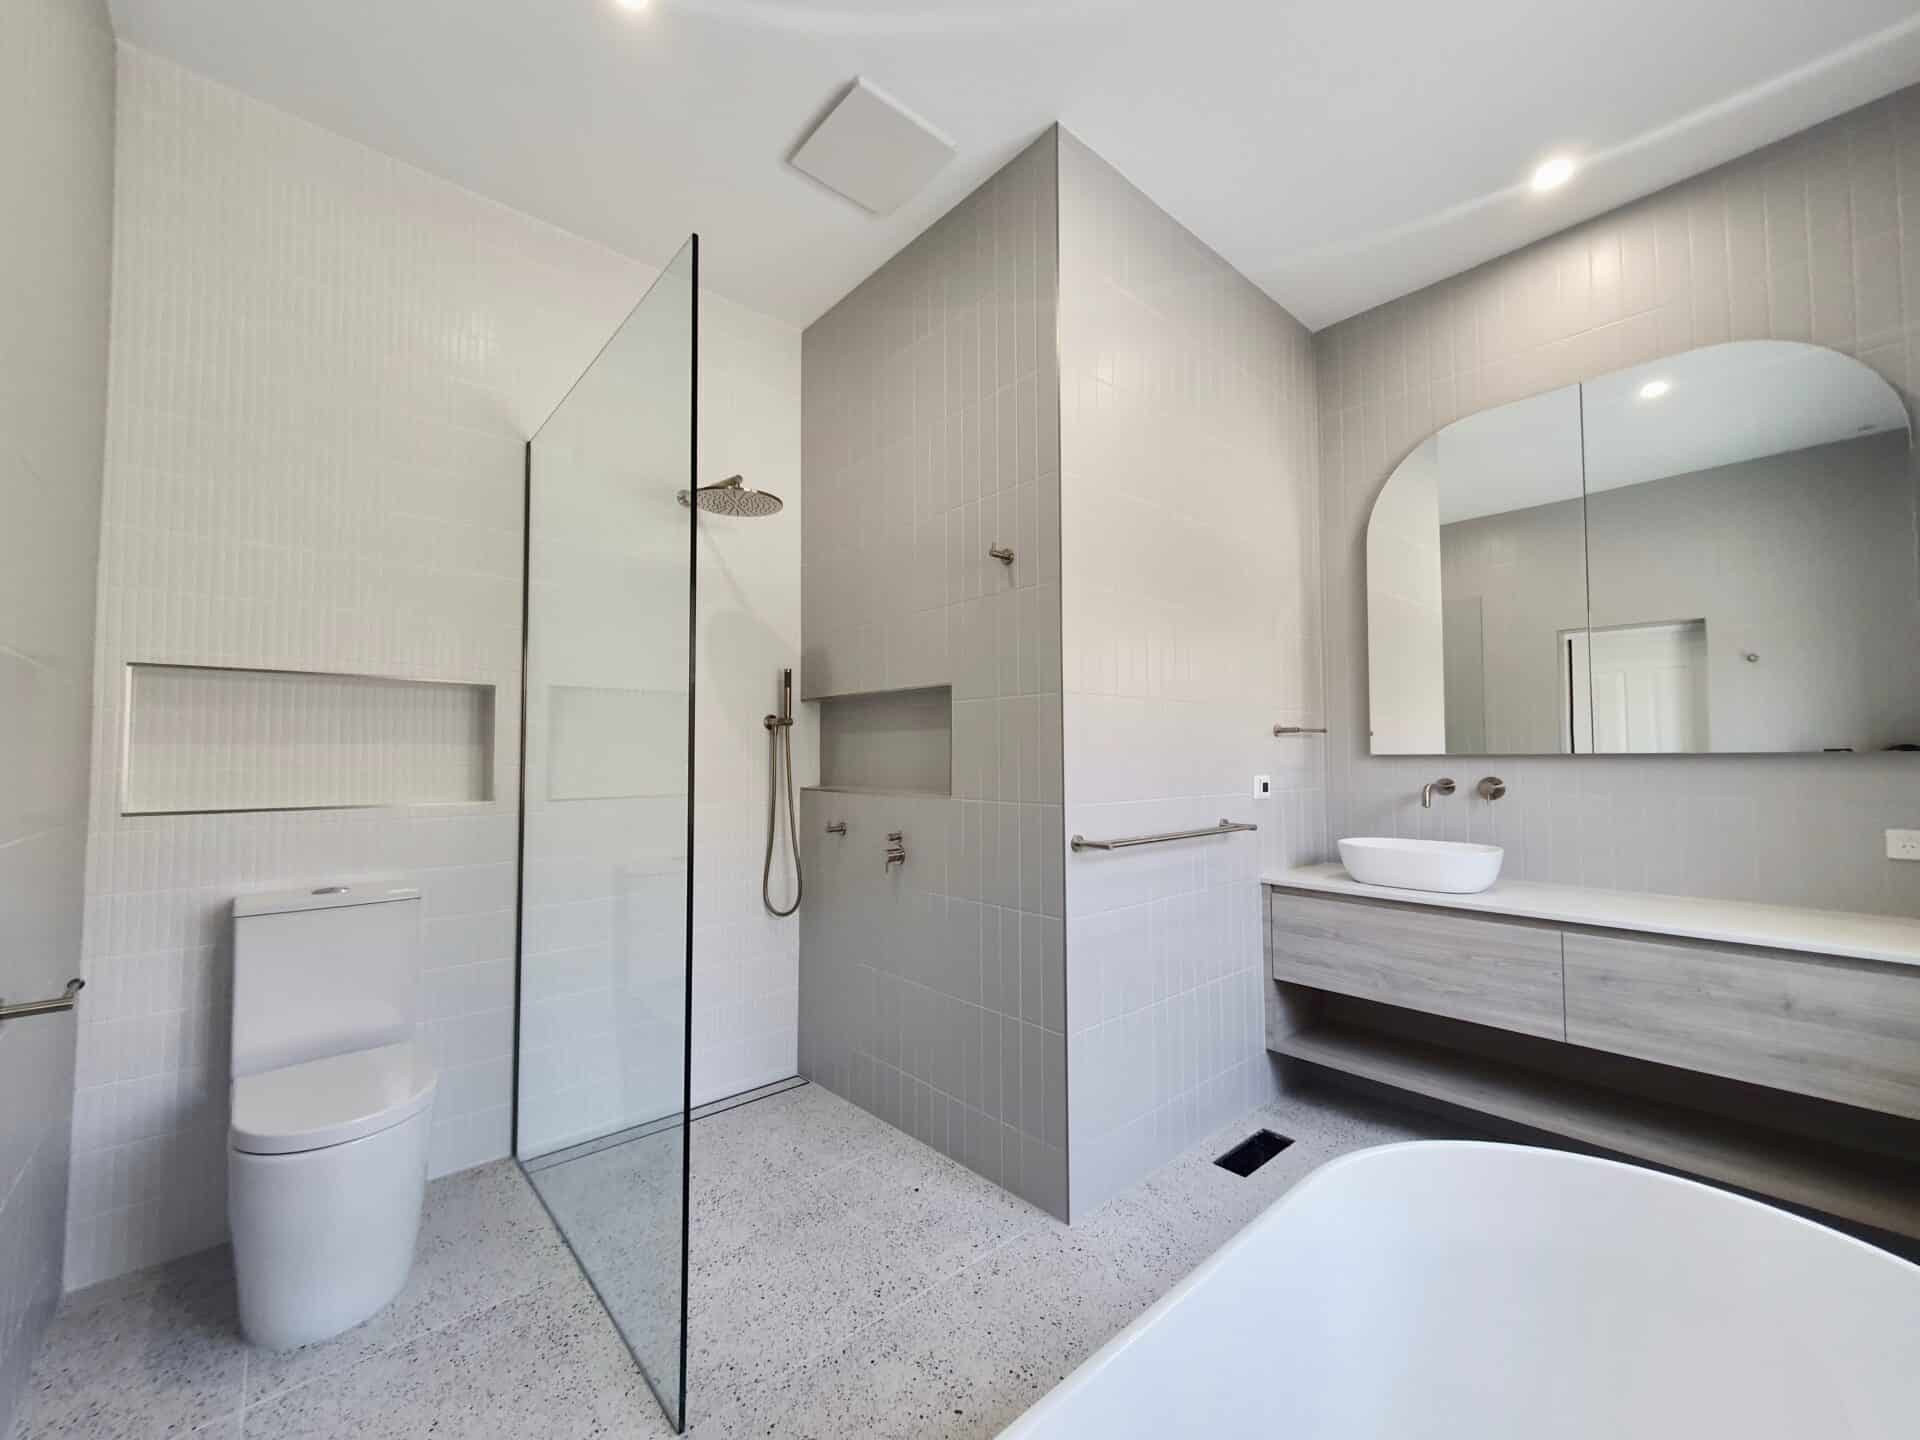 another view of a modern bathroom with a vanity, shower and bath tub